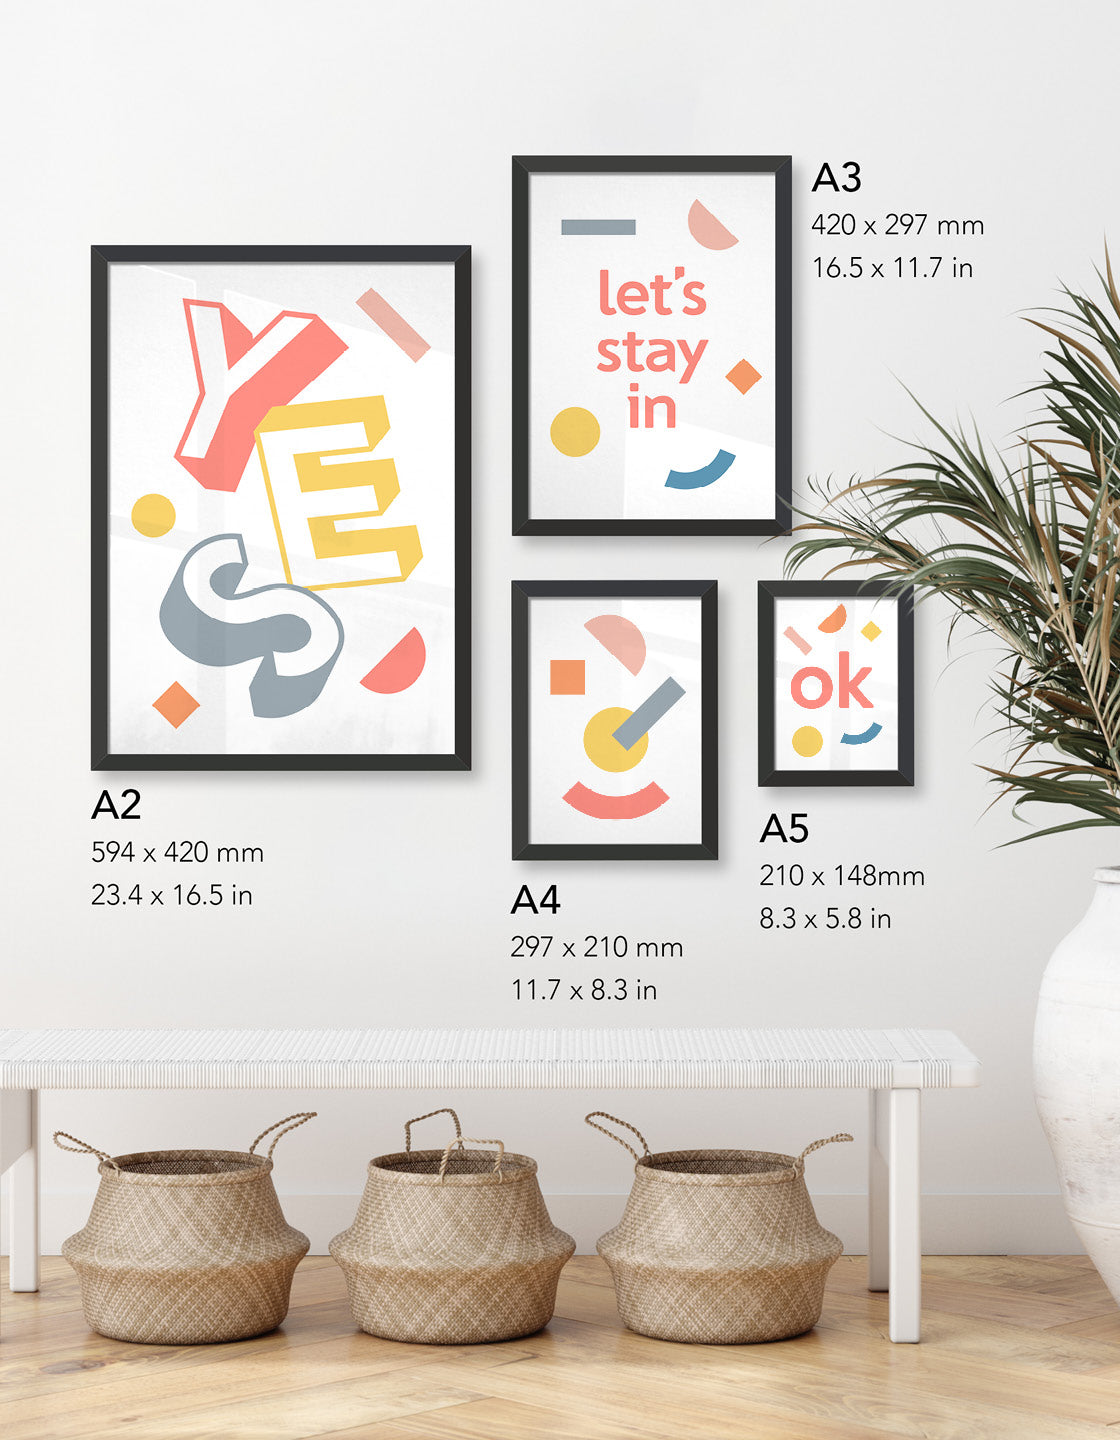 Image depicts different size prints available